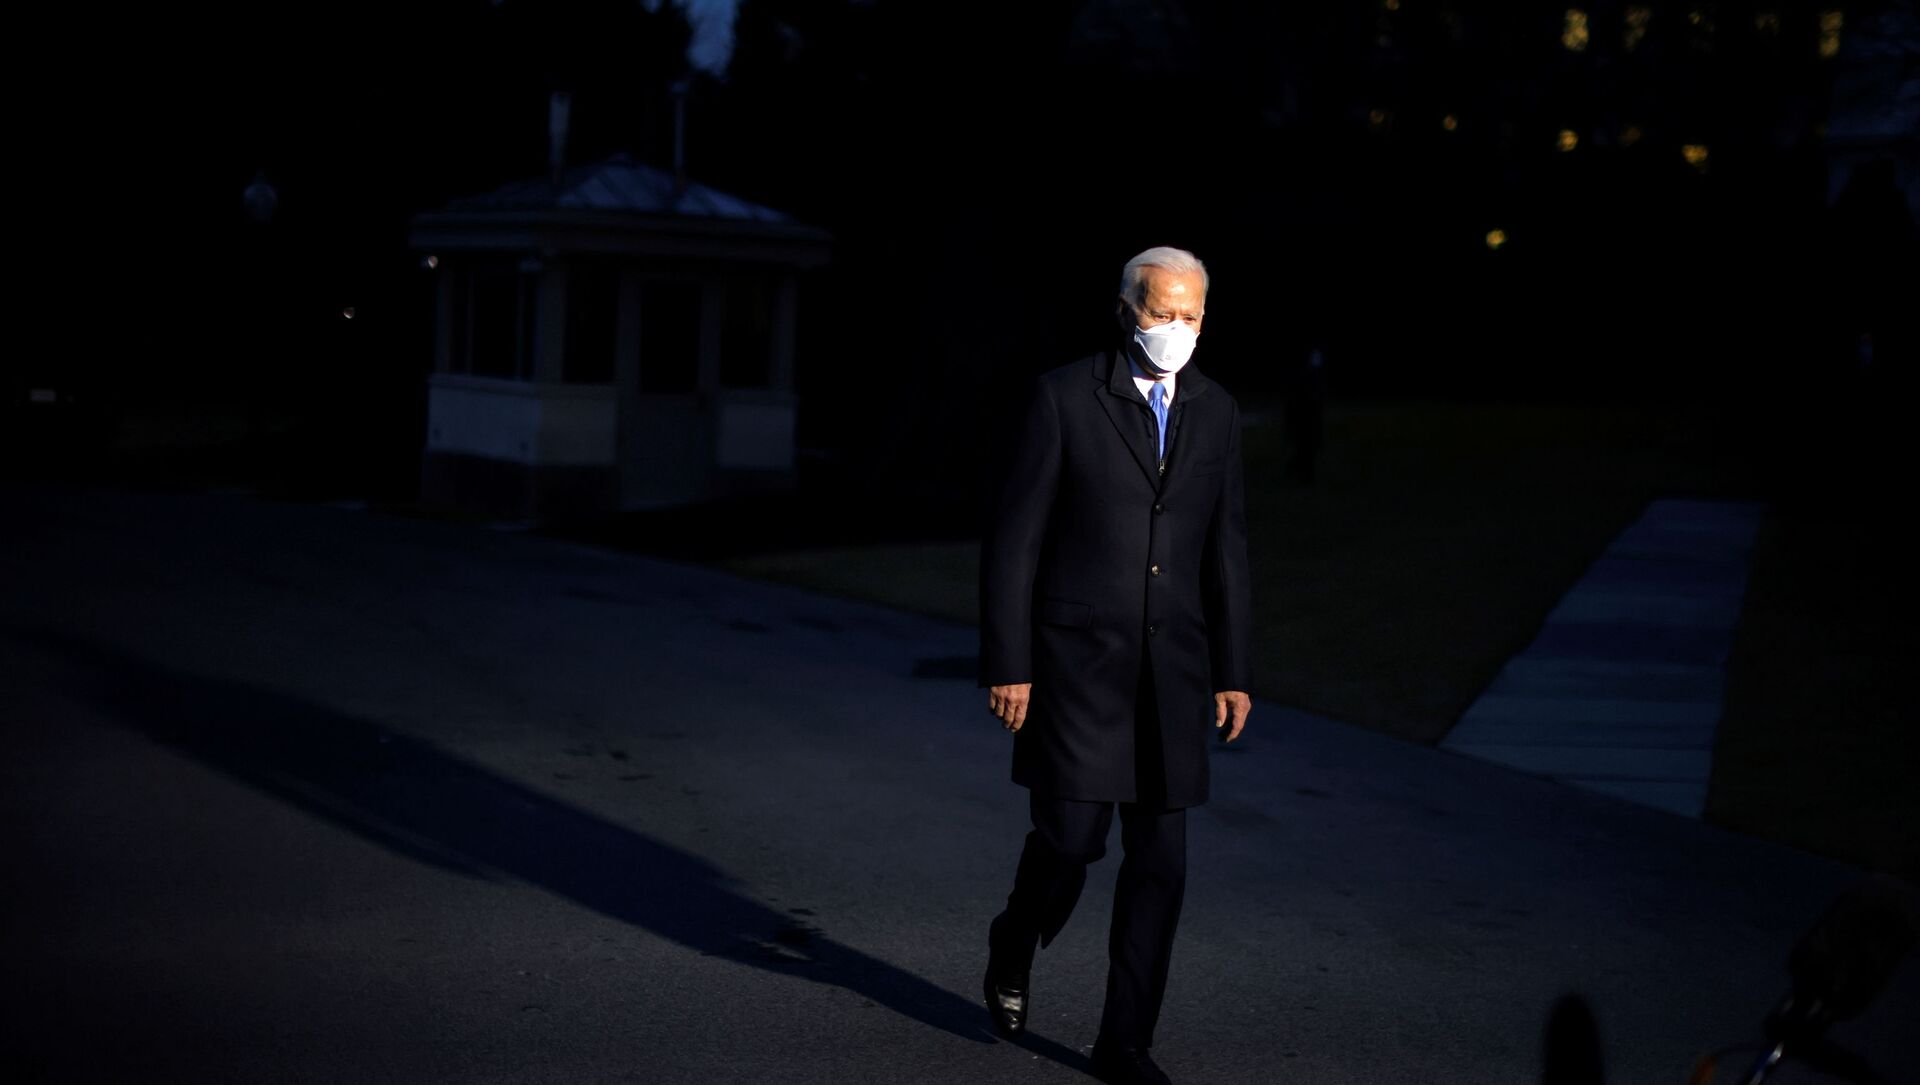 U.S. President Joe Biden leaves the Oval Office as he departs to Camp David from the South Lawn of the White House in Washington, U.S., February 12, 2021 - Sputnik International, 1920, 14.02.2021